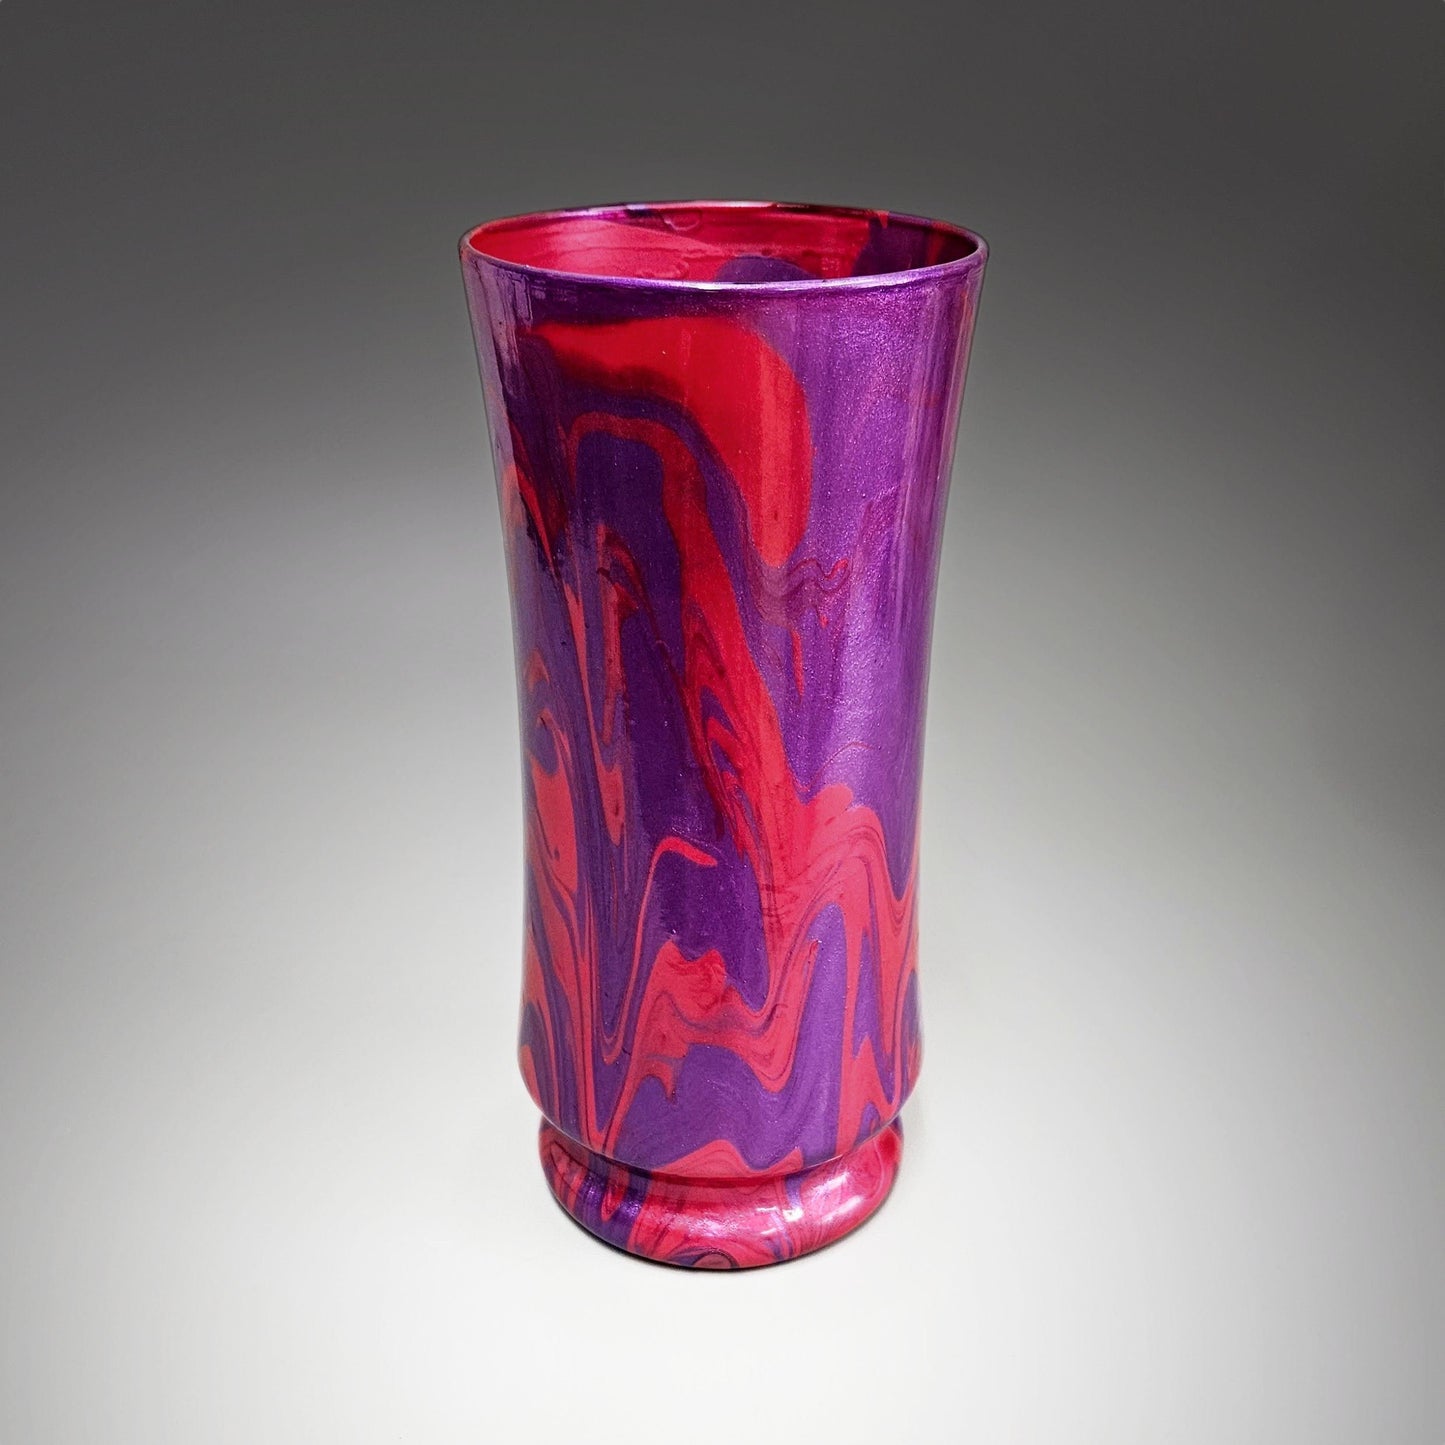 Painted Glass Vase in Purple and Rose Red